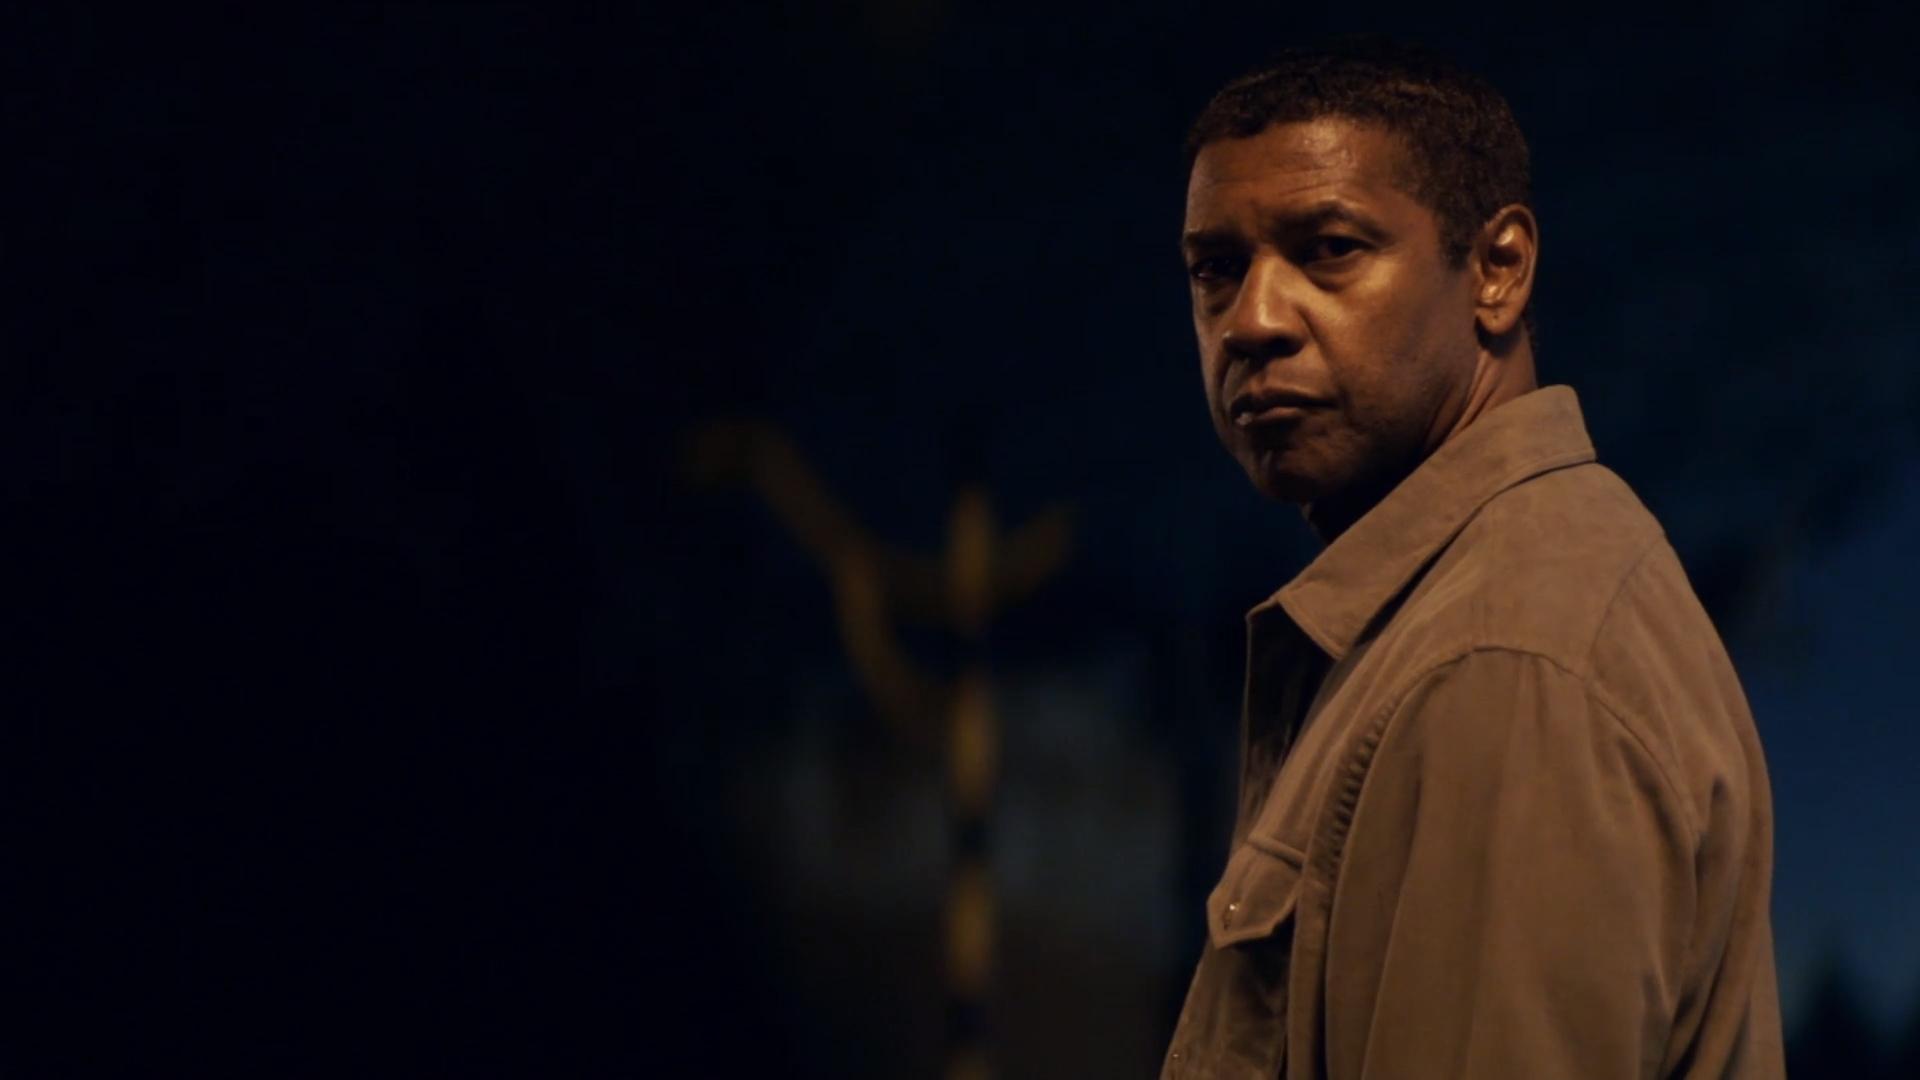 Official from The Equalizer 2 (2018)